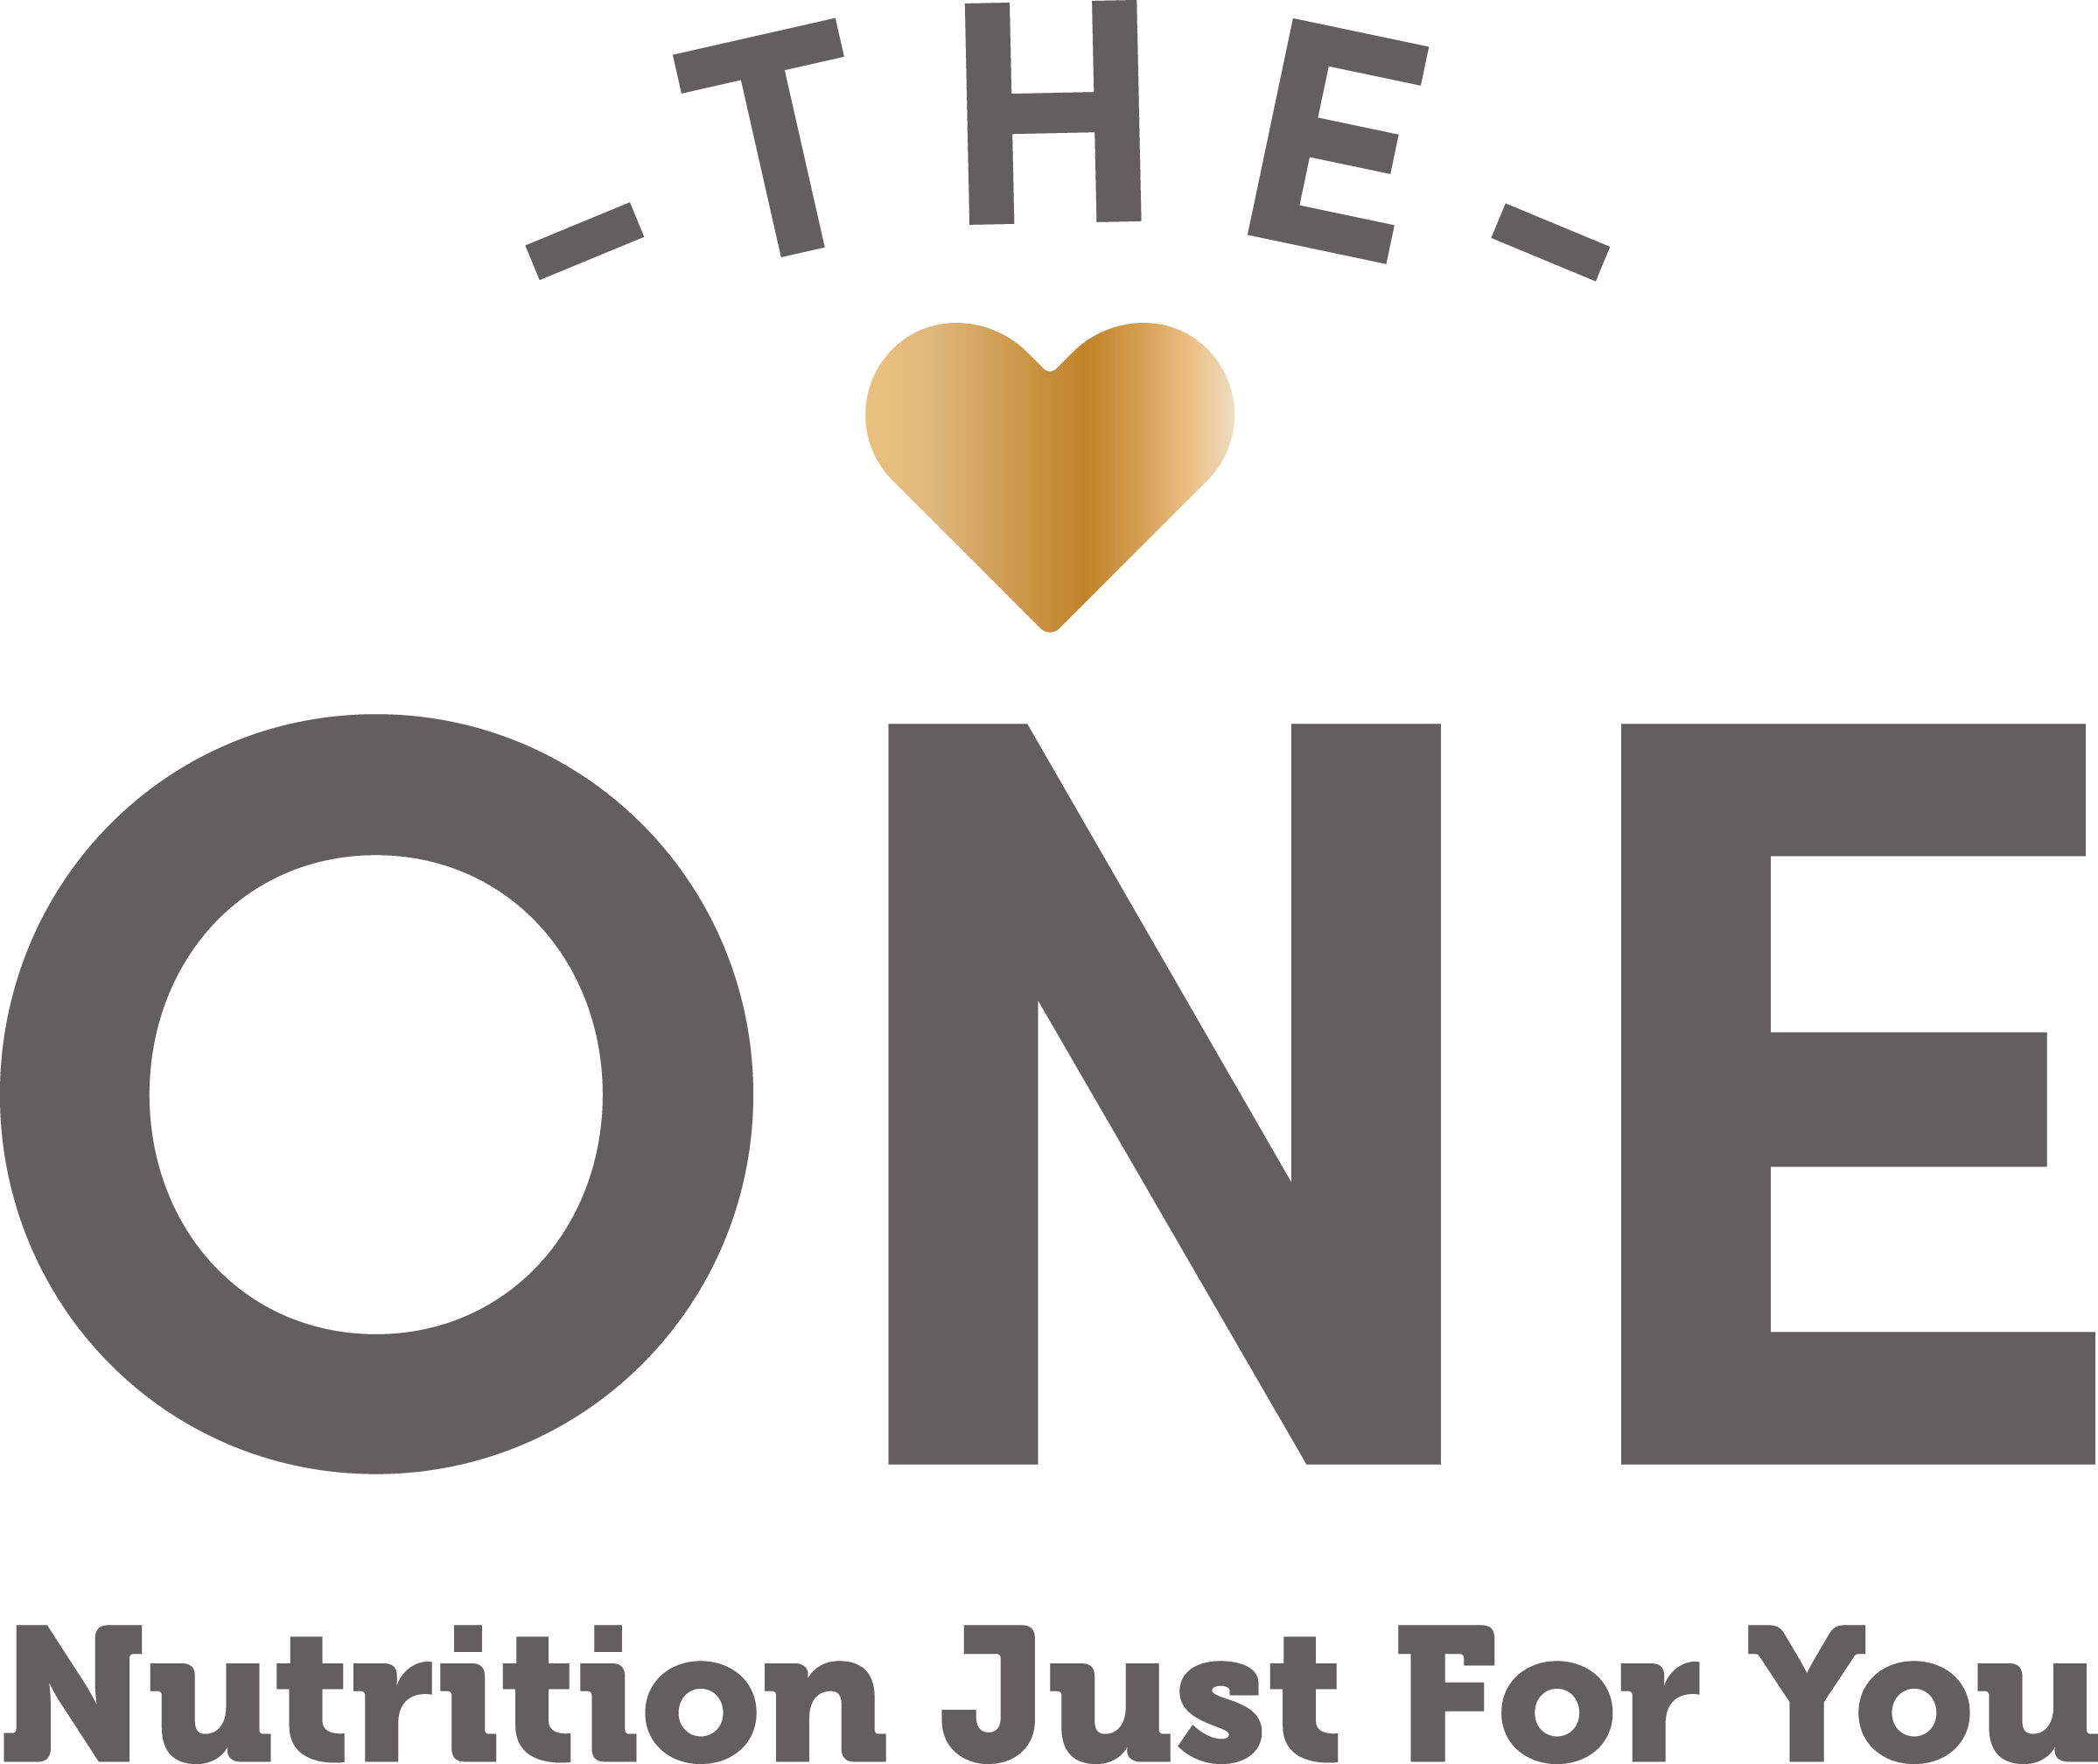 The One Nutrition Just For You Help Center home page